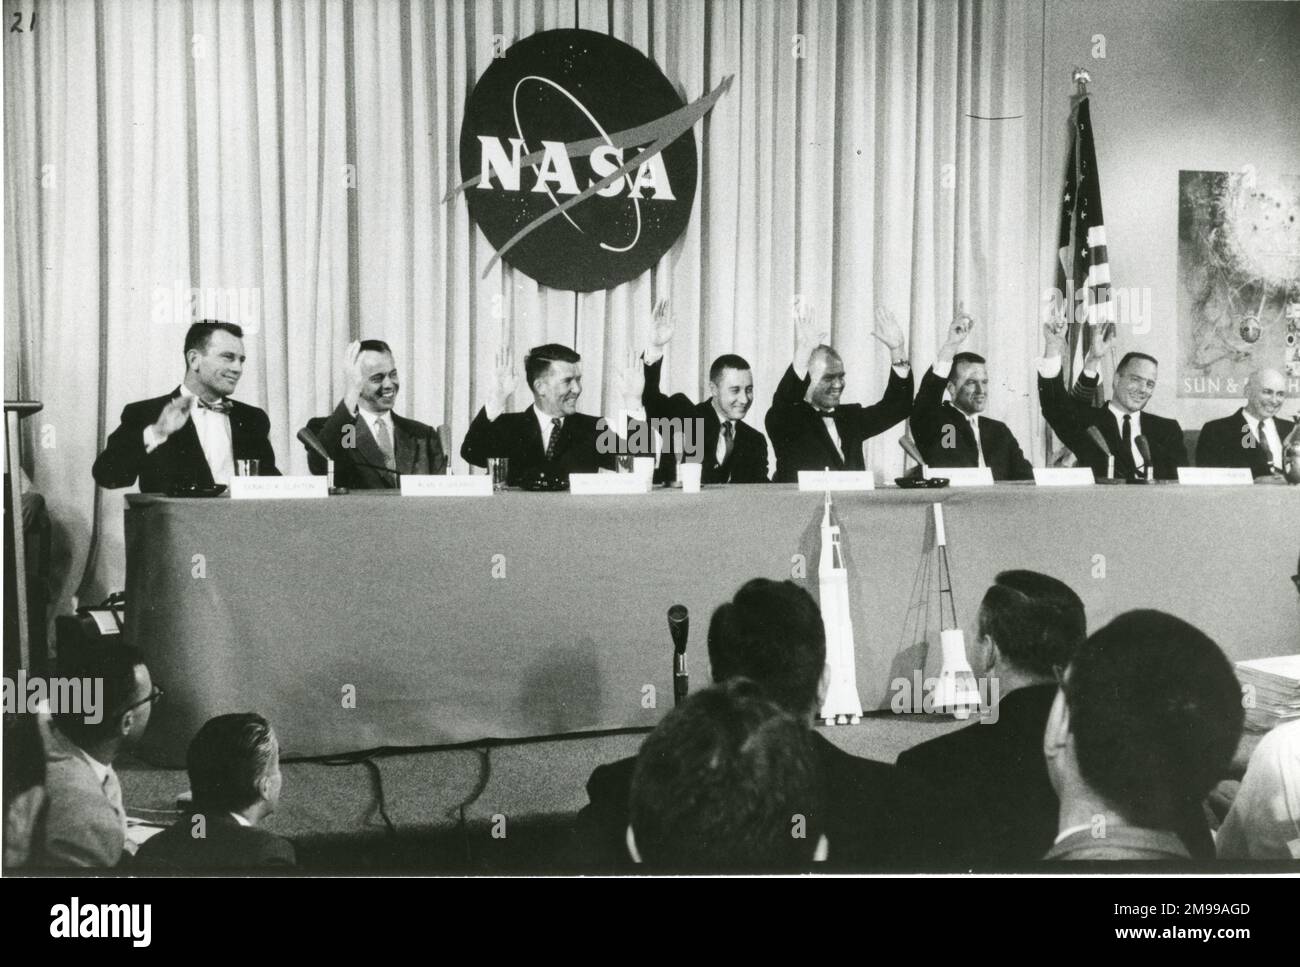 Astronauts are introduced to the American and foreign press at a press conference in Washington in summer 1959. From left: Maj Deke Slayton, Cdr Alan Shepard, Cdr Walter Schirra, Maj Virgil Grissom, Lt Col John Glenn, Maj Leroy Cooper and Lt Cdr Malcolm Scott Carpenter. Stock Photo